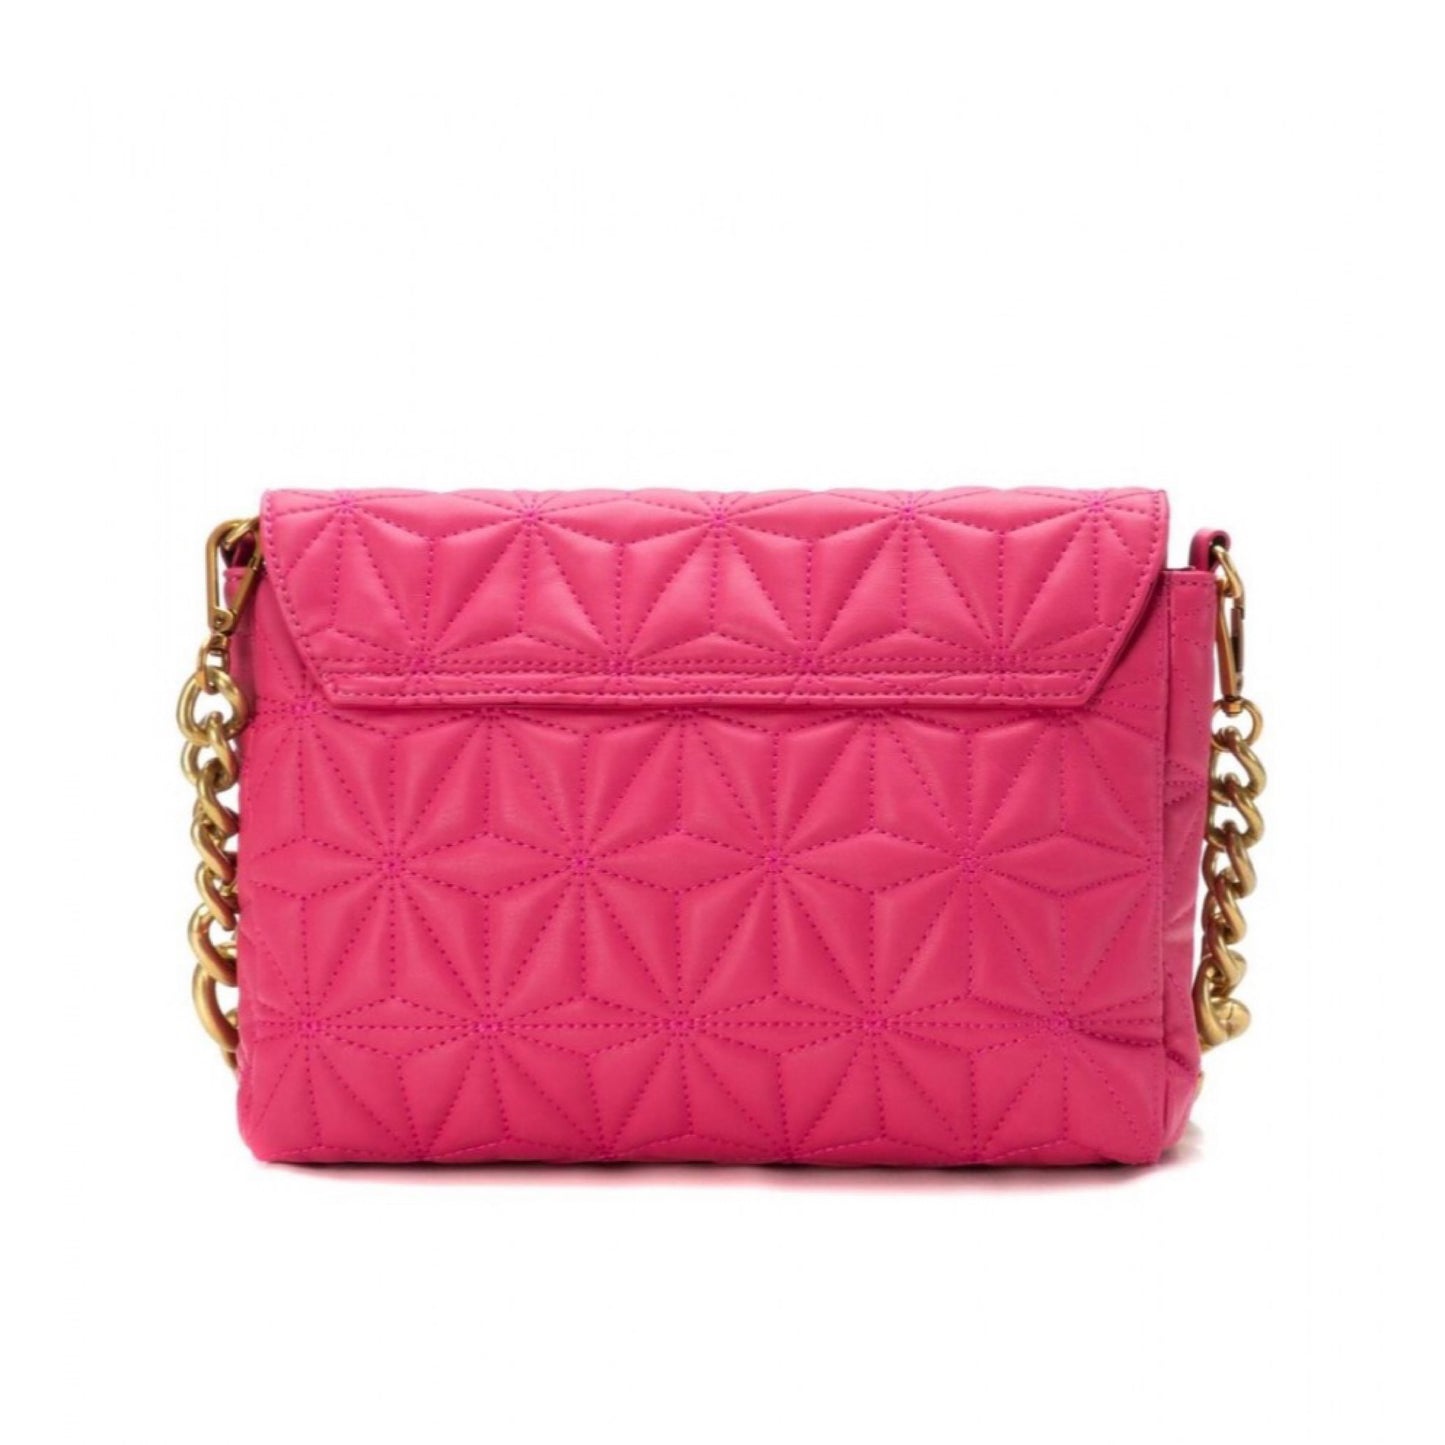 XTI Quilted Fuchsia Shoulder Bag